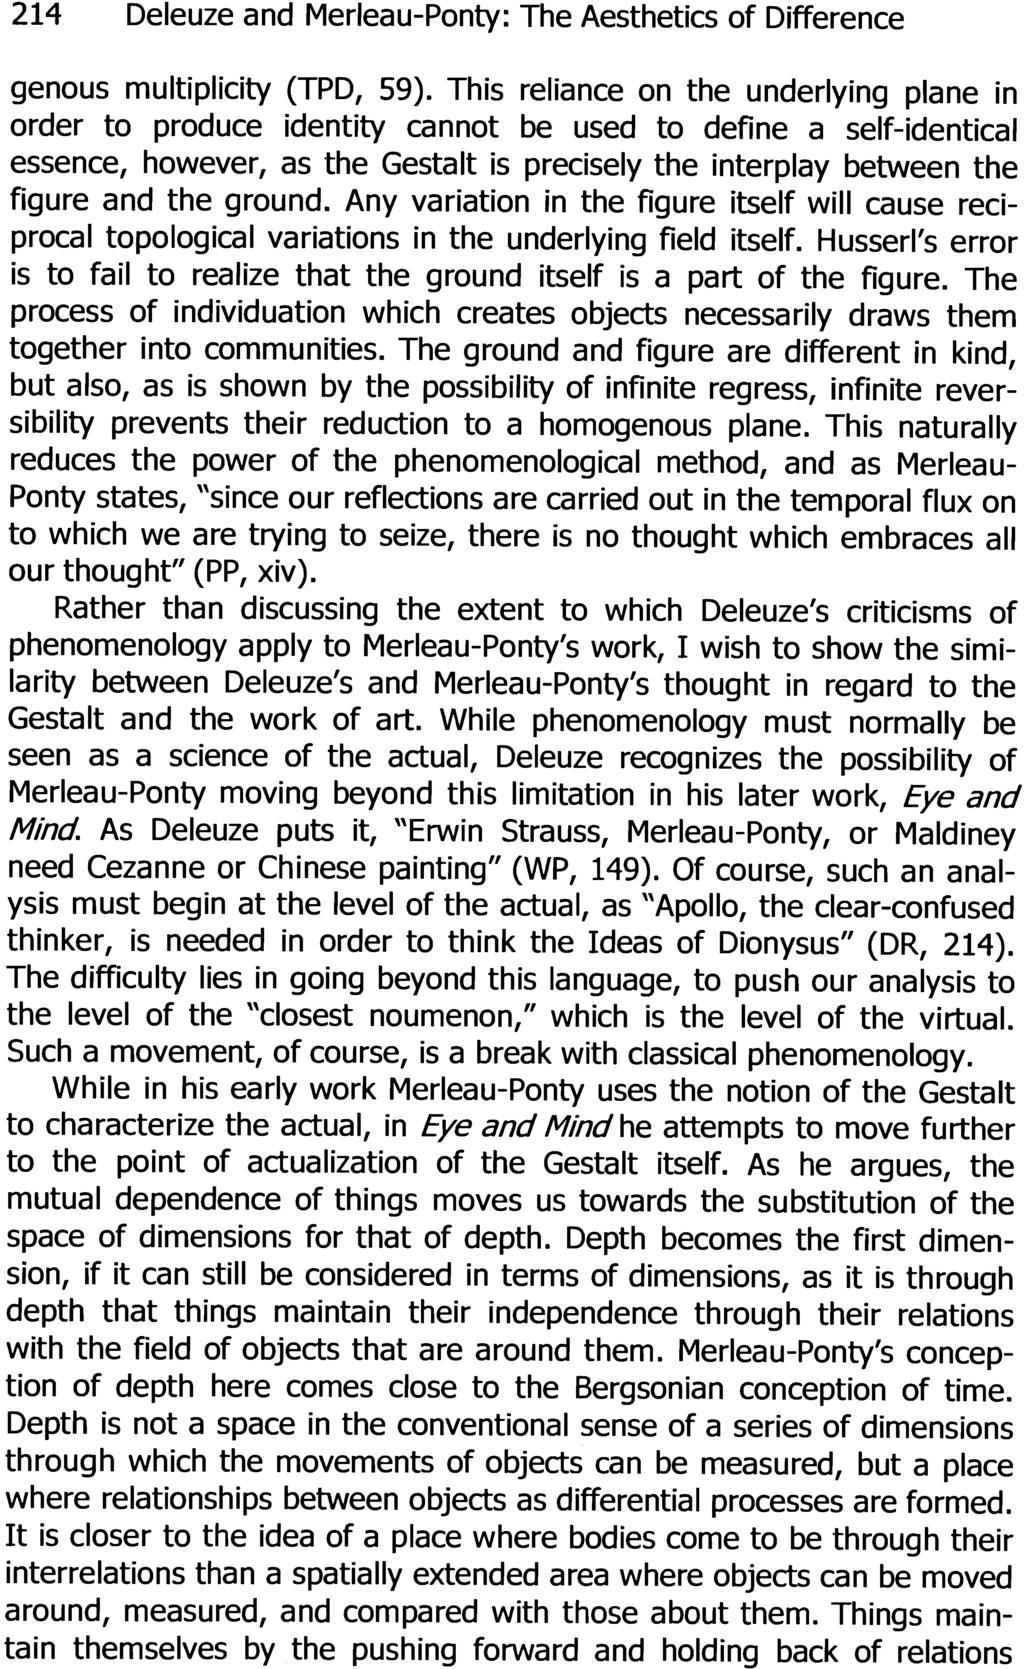 214 Deleuze and Merleau-Ponty: The Aesthetics of Difference genous multiplicity (TPD, 59).